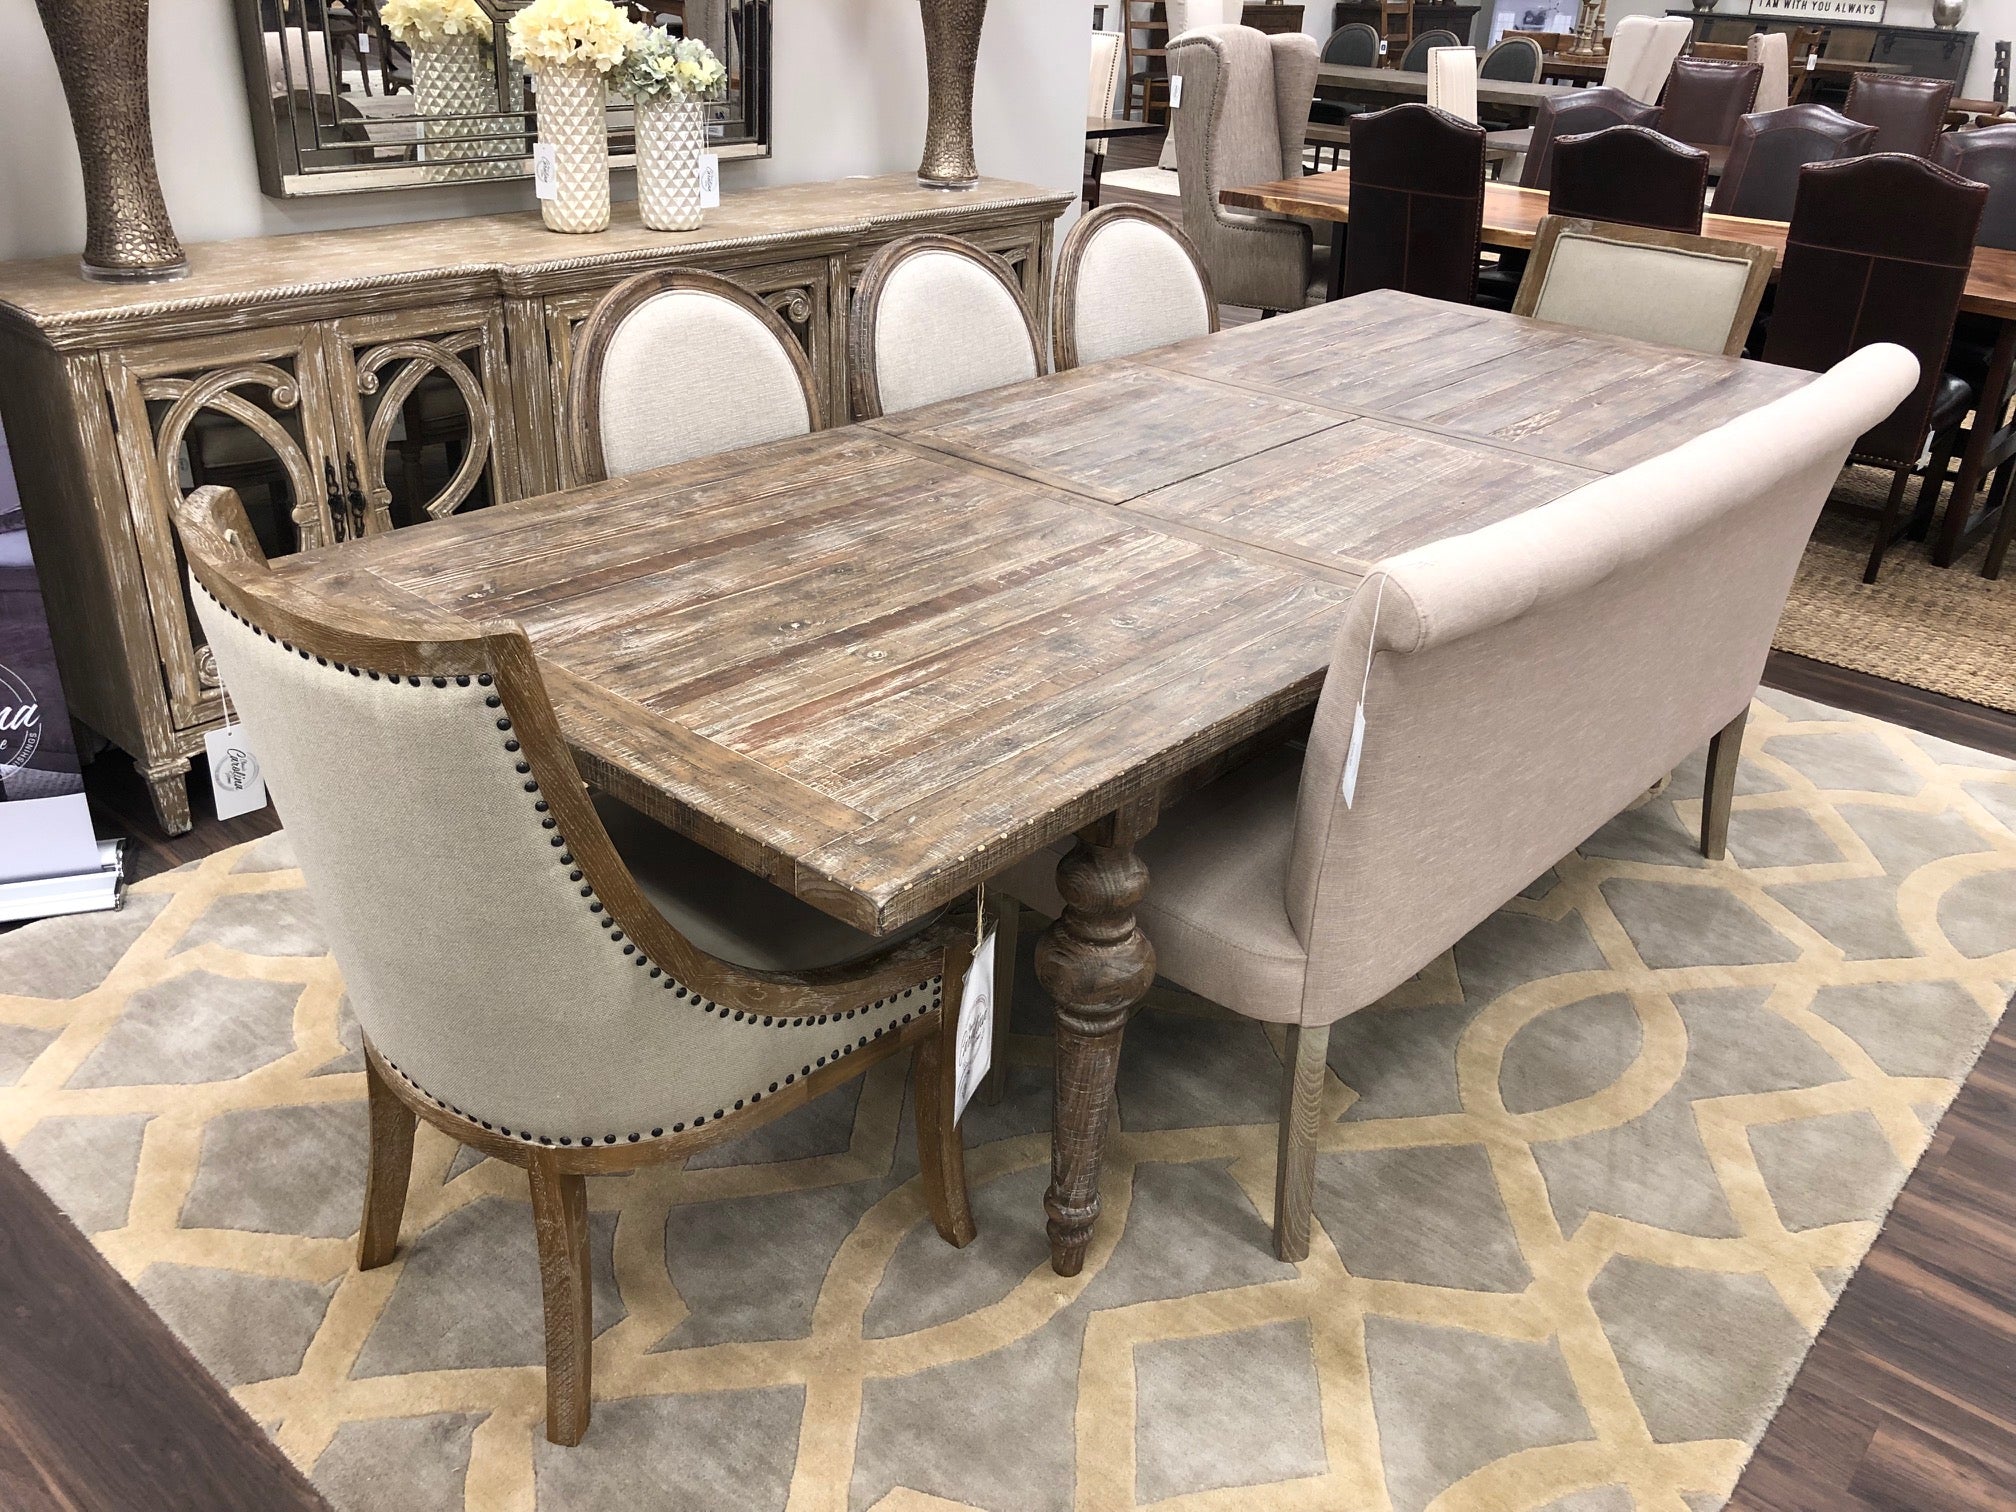 Leafed Dining Room Tables Top Ideas